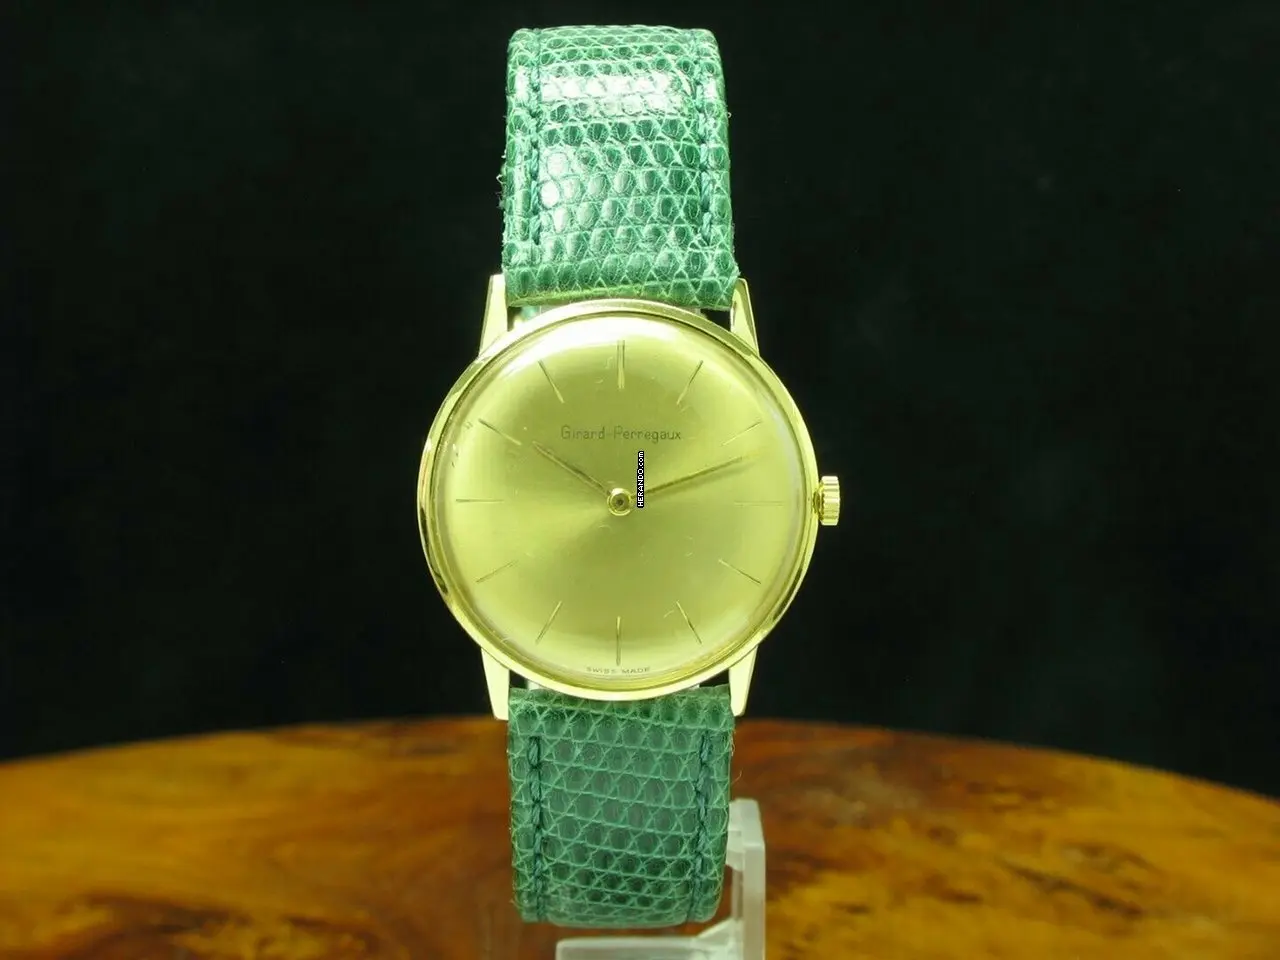 watches-344129-30037399-wld7uo25c8d56z527ob90fby-ExtraLarge.webp